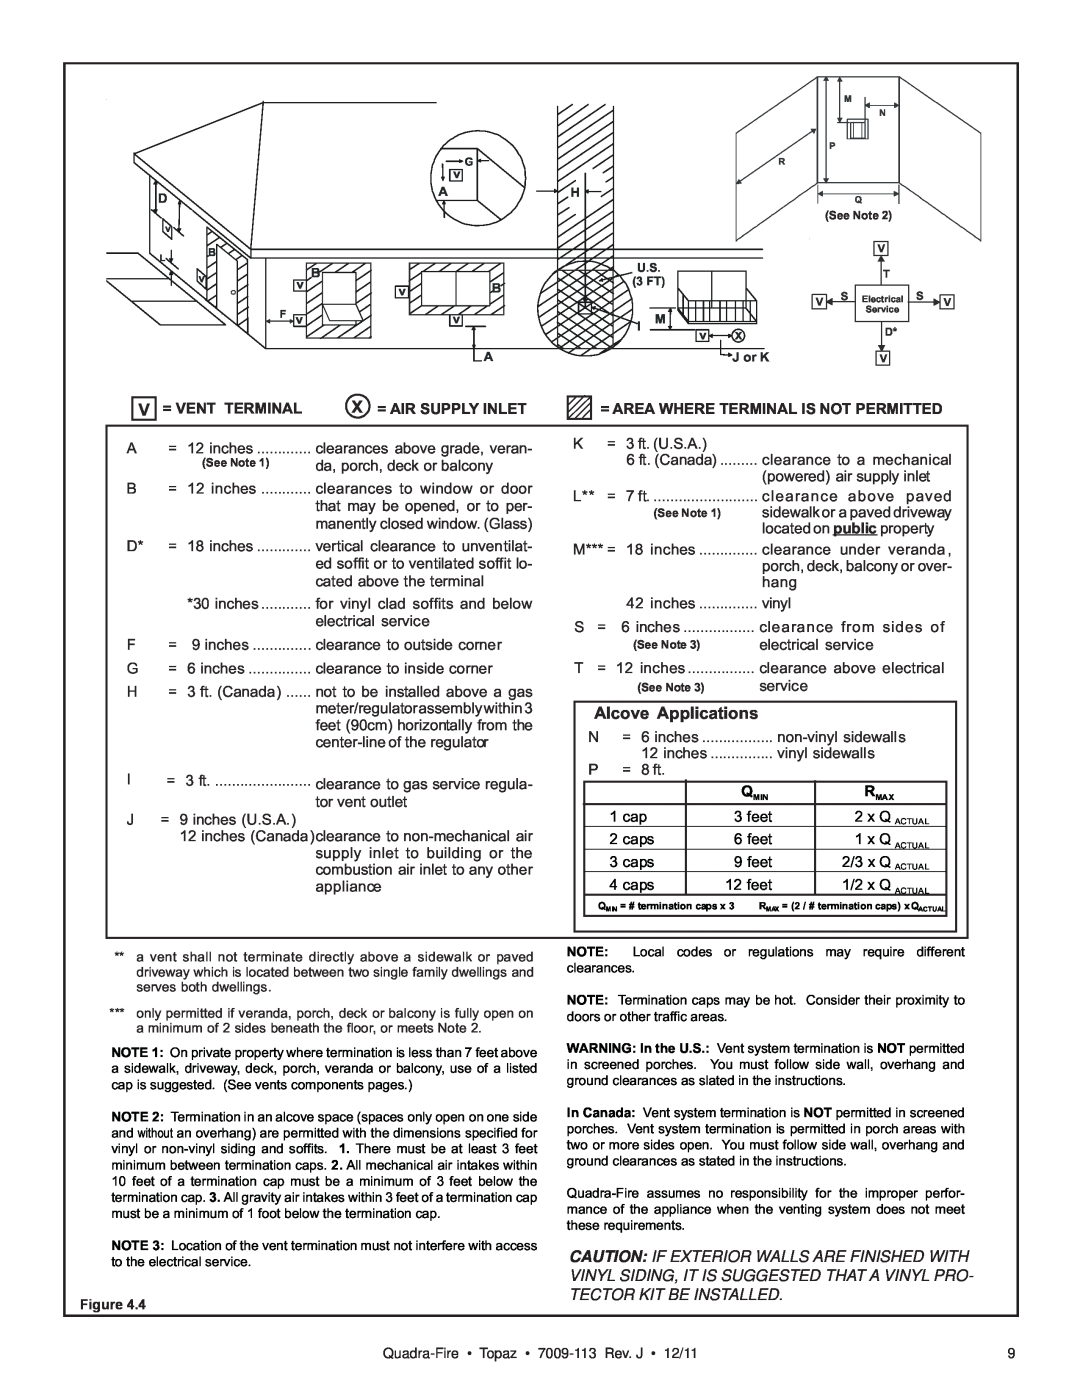 OmniTek 839-1290 Alcove Applications, = Vent Terminal, X = Air Supply Inlet, = Area Where Terminal Is Not Permitted, 1 cap 